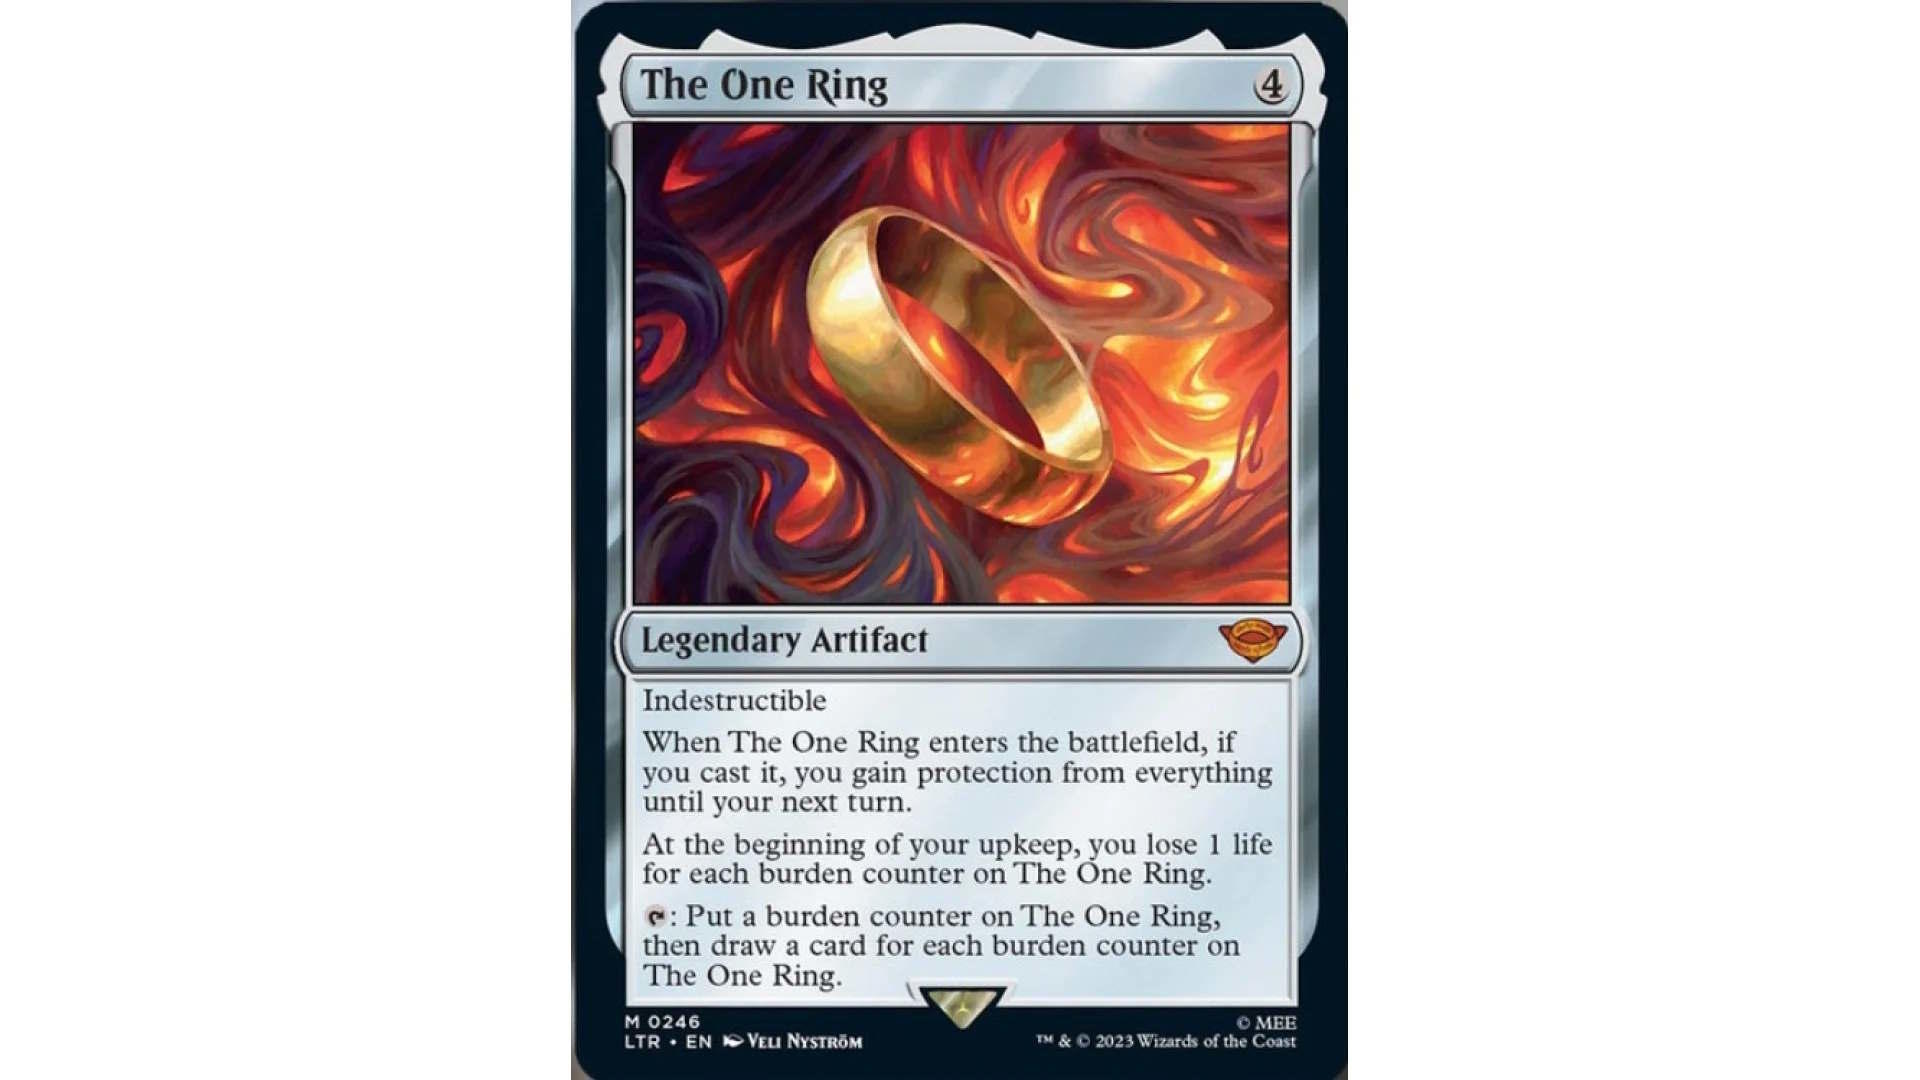 mtg-magic-the-gathering-cards-spoilers-lord-of-the-rings-lotr-the-one-ring.jpg